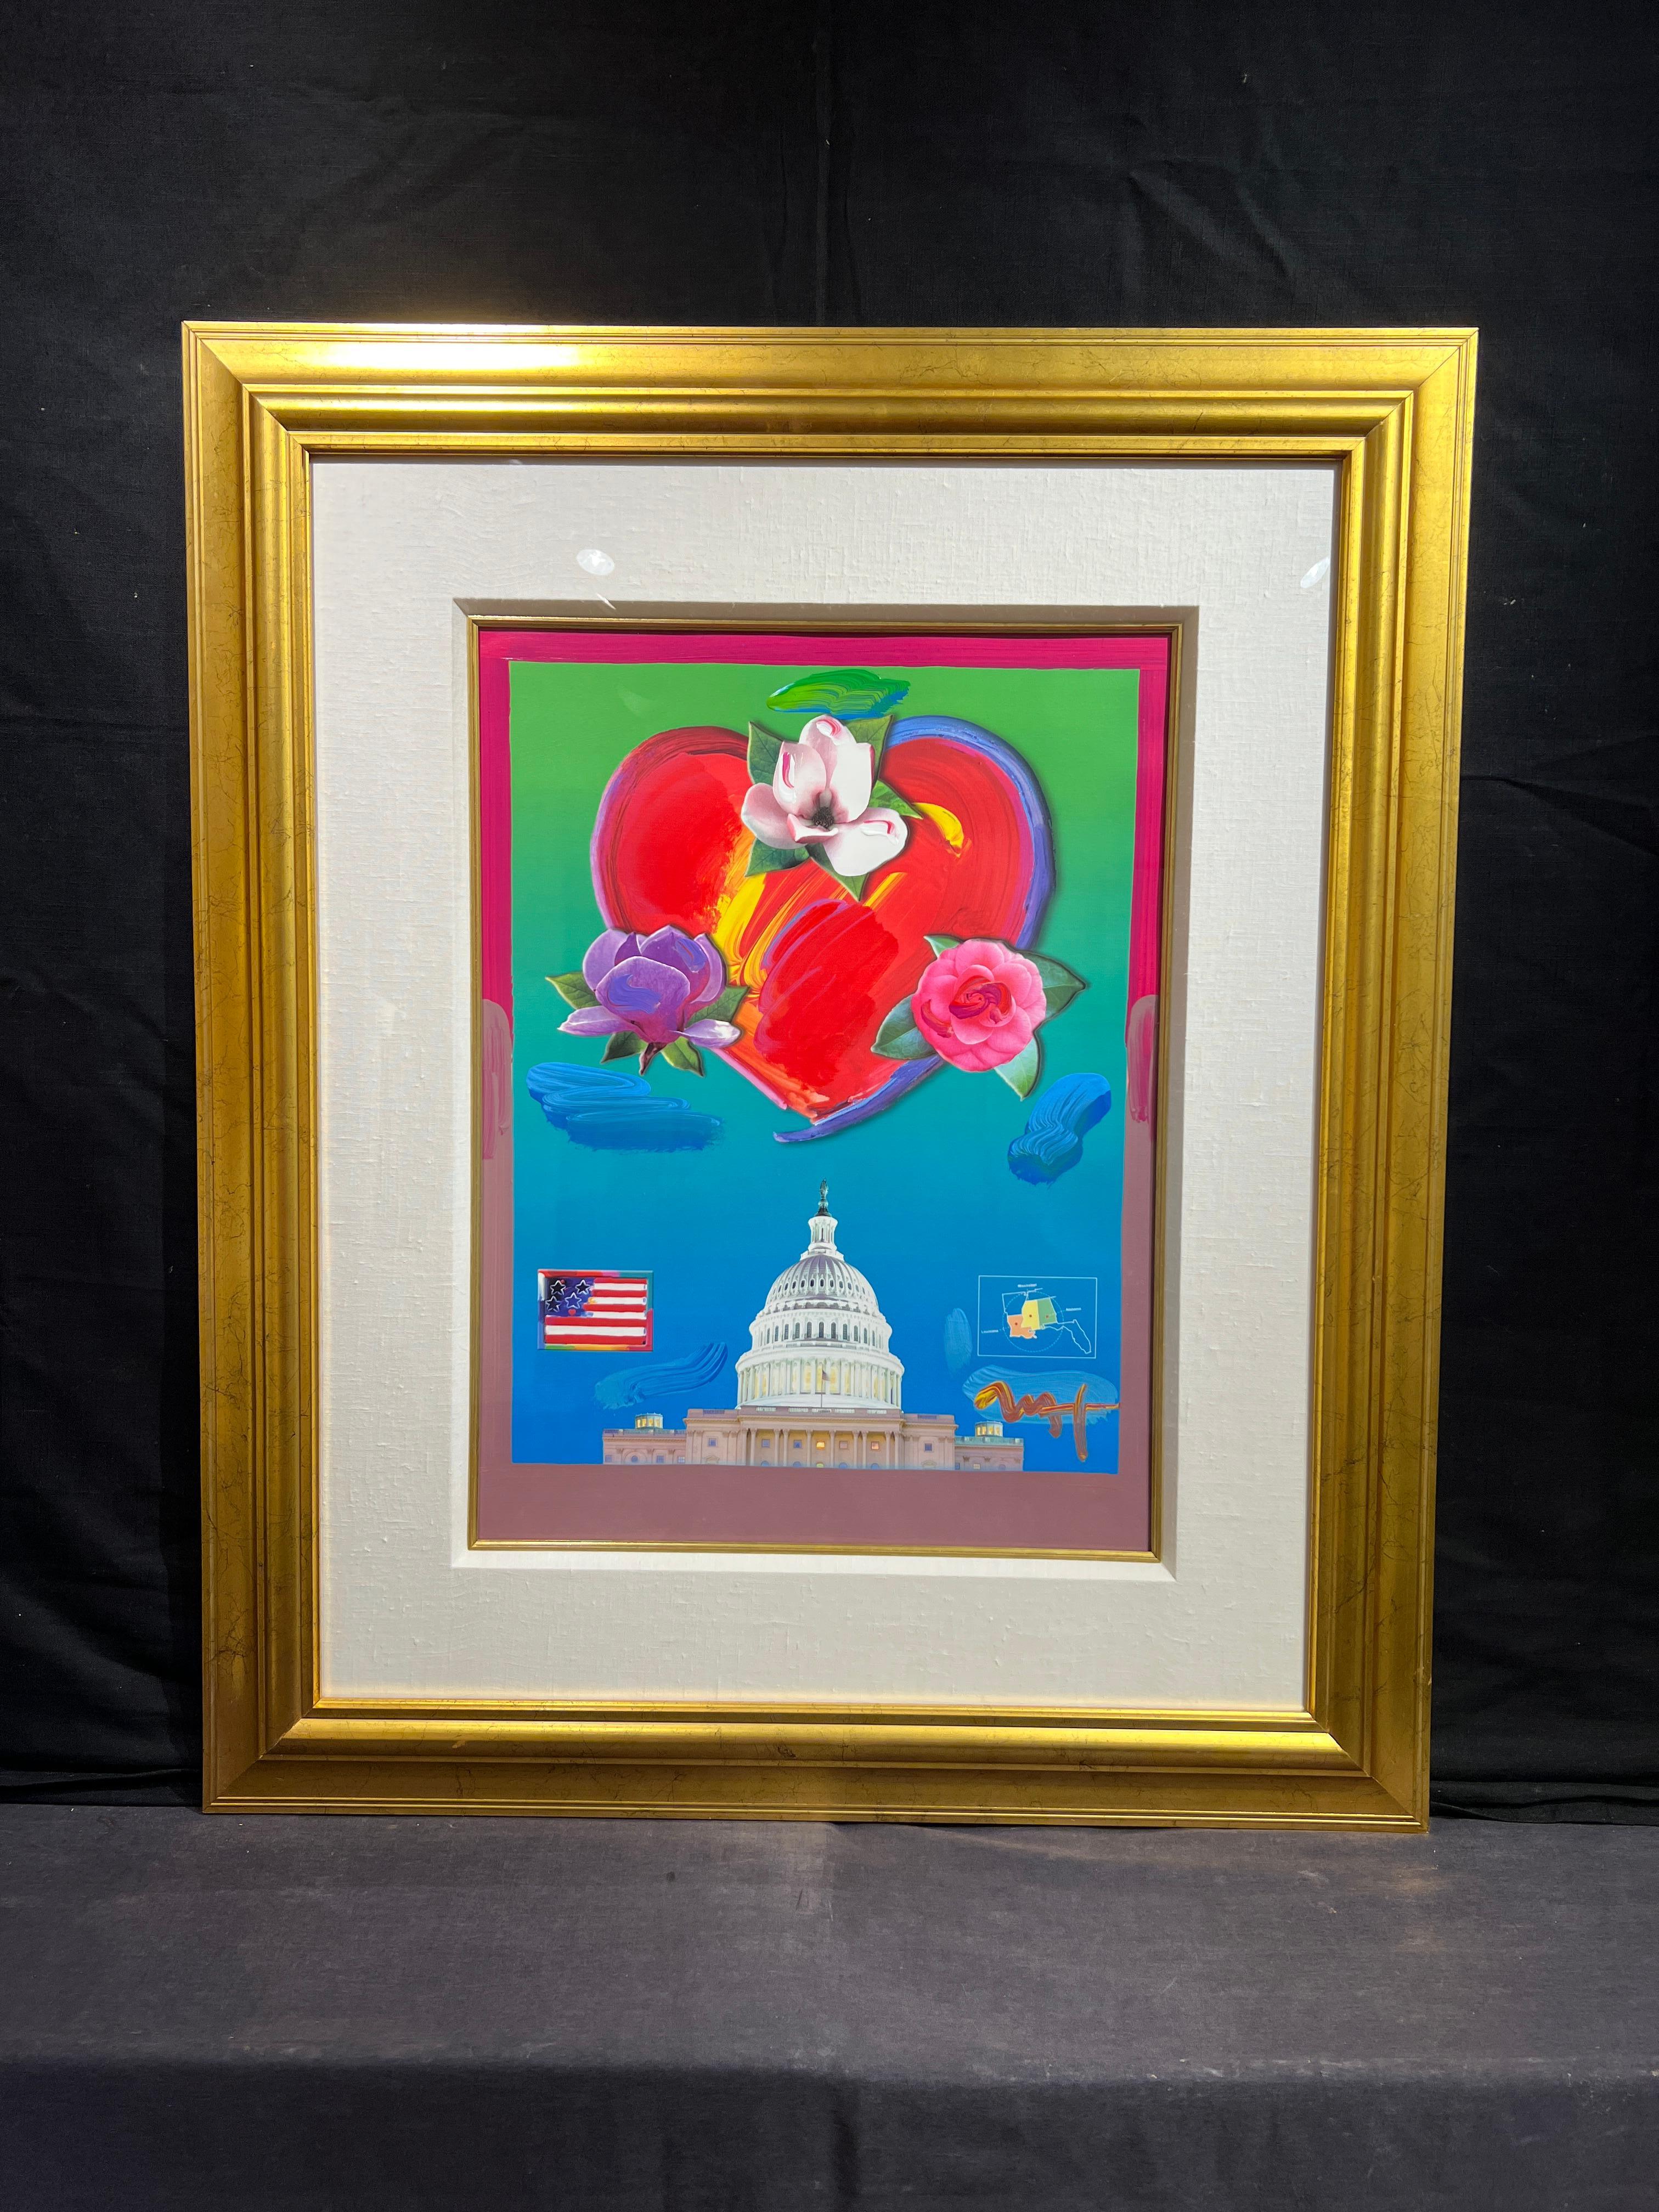 Peter Max (German, b. 1937)
Katrina Relief
Signed Lower Right
24 x 18 inches
38 x 32 inches with frame

Peter Max, born Peter Max Finkelstein,  is a multi-dimensional artist focused on contemporary events.  When he left art school in the 1960s he